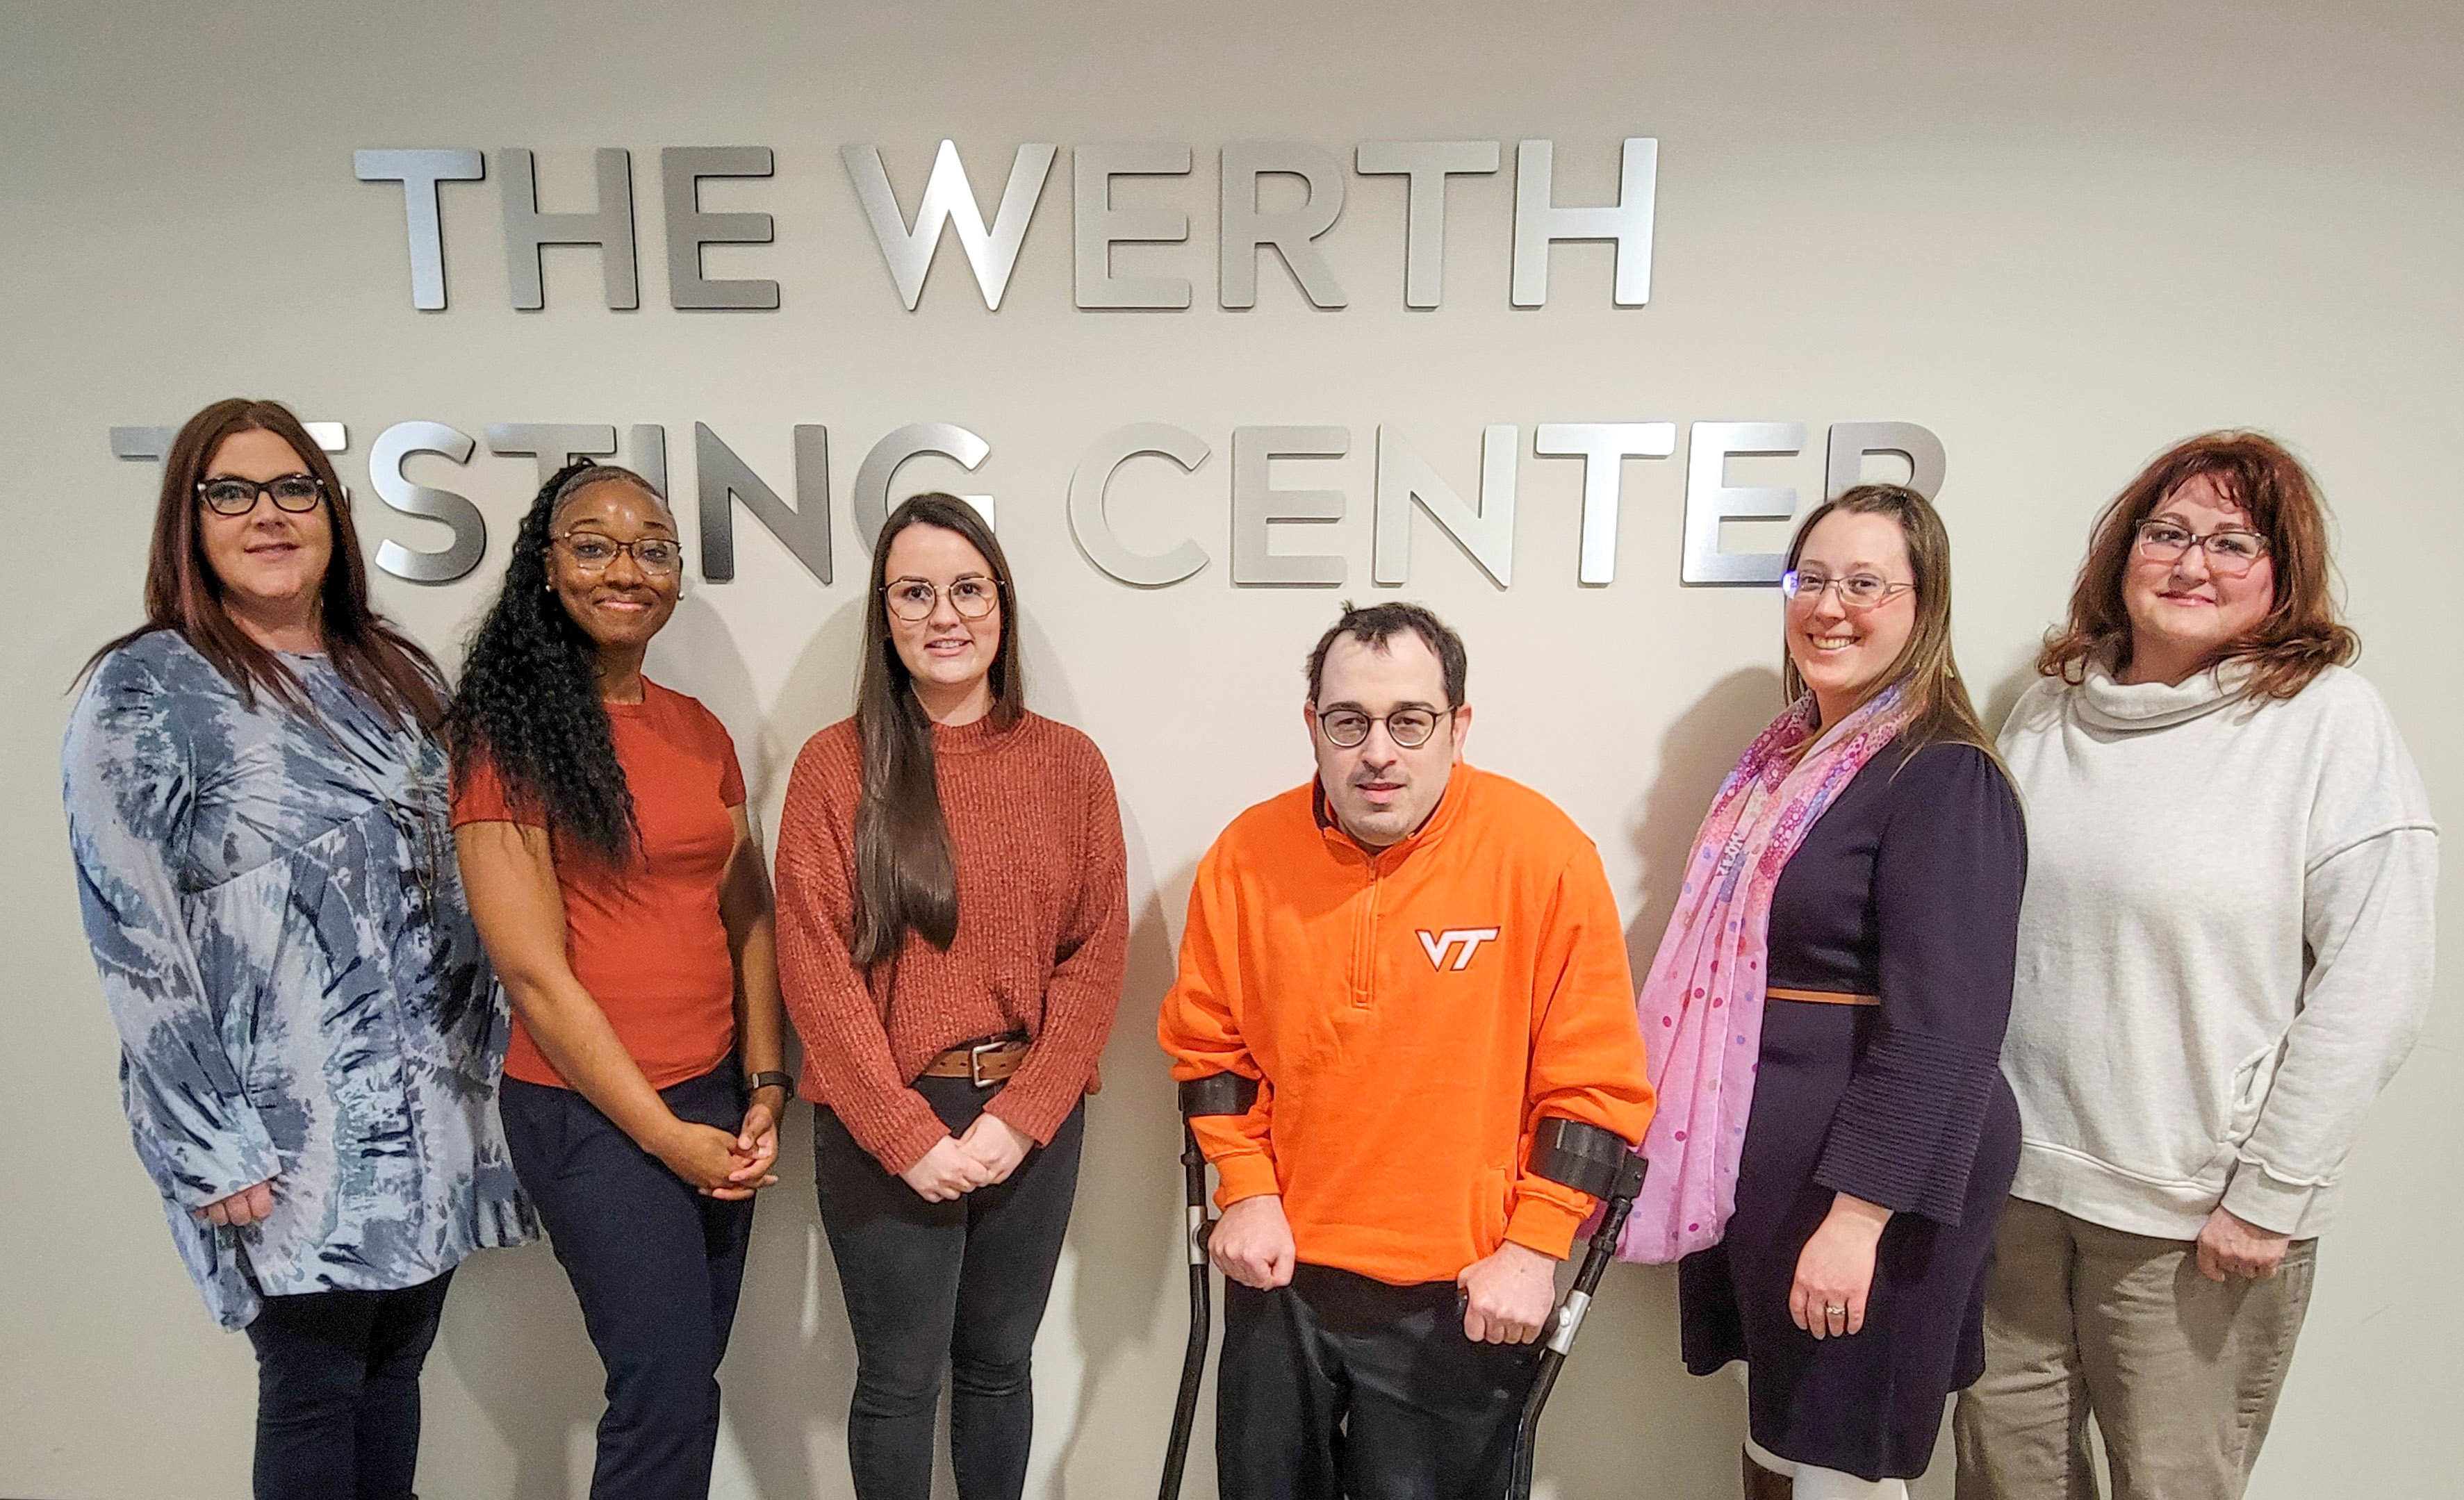 6 individuals stand in front of a silver sign that reads, "The Werth Testing Center." From left to right, there are: A tall, middle-aged white female wearing a blue blouse and shoulder-length auburn hair; a young, black female with dark curly hair, wearing a bright orange top; a young white female with longer brown hair wearing an orange sweater; a short middle-aged white male wearing a Virginia Tech sweatshirt and standing on forearm crutches; a middle-aged white female with shoulder length blonde hair and a purple dress; a middle-aged white female with short red hair and a white blouse. They are all wearing glasses, and smiling for a photo while standing beside one another.